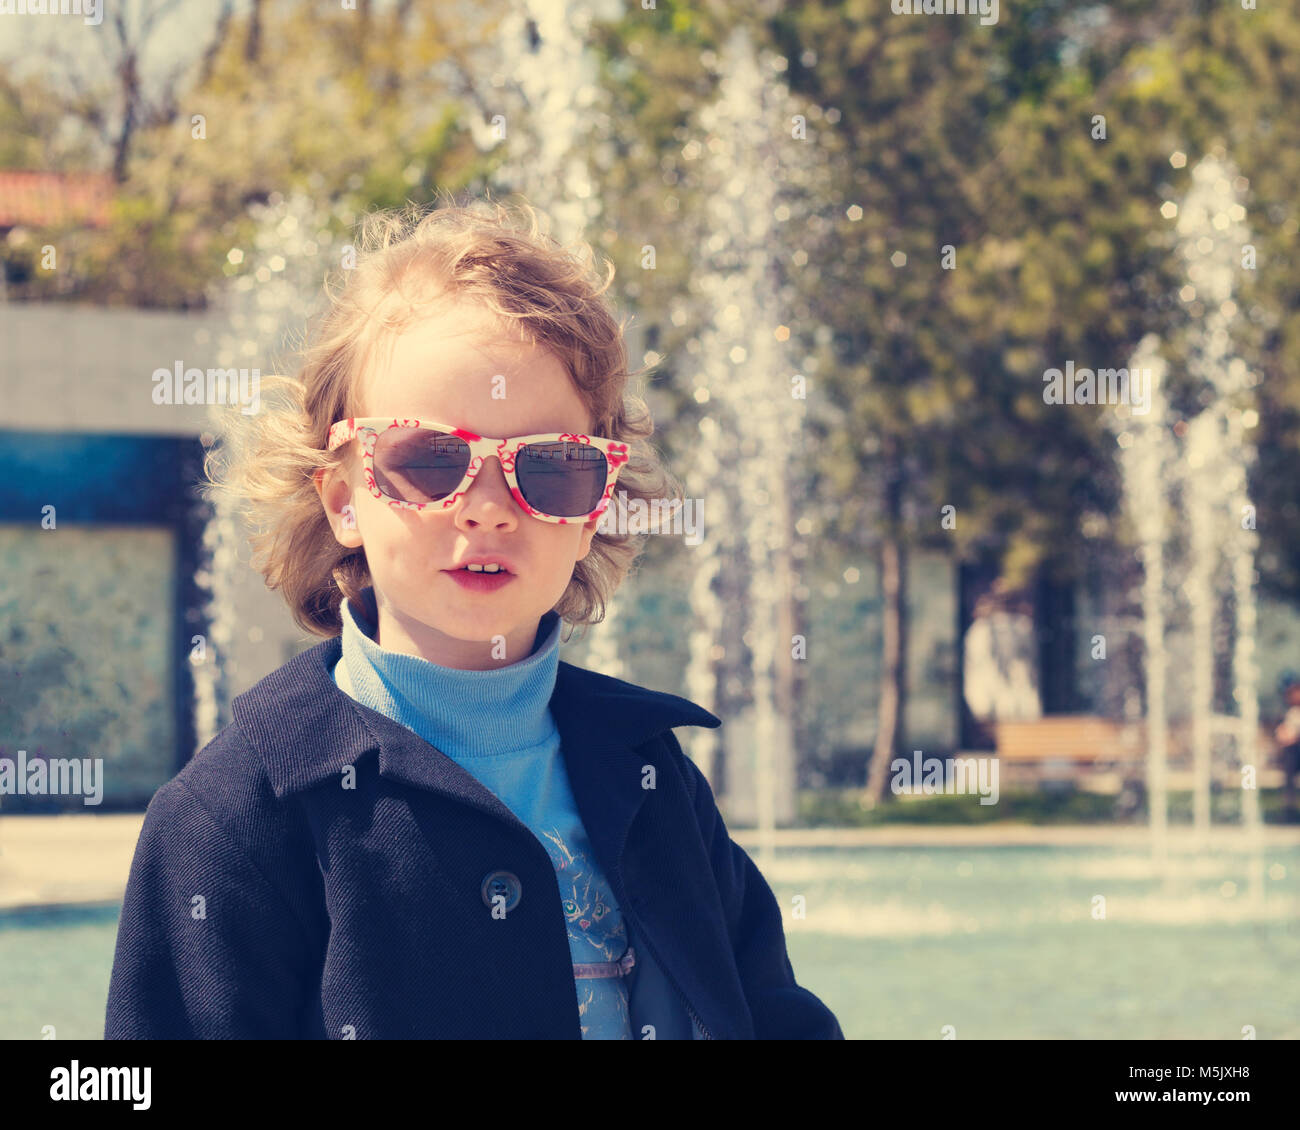 Beautiful little girl in sunglasses. The image is tinted. Stock Photo